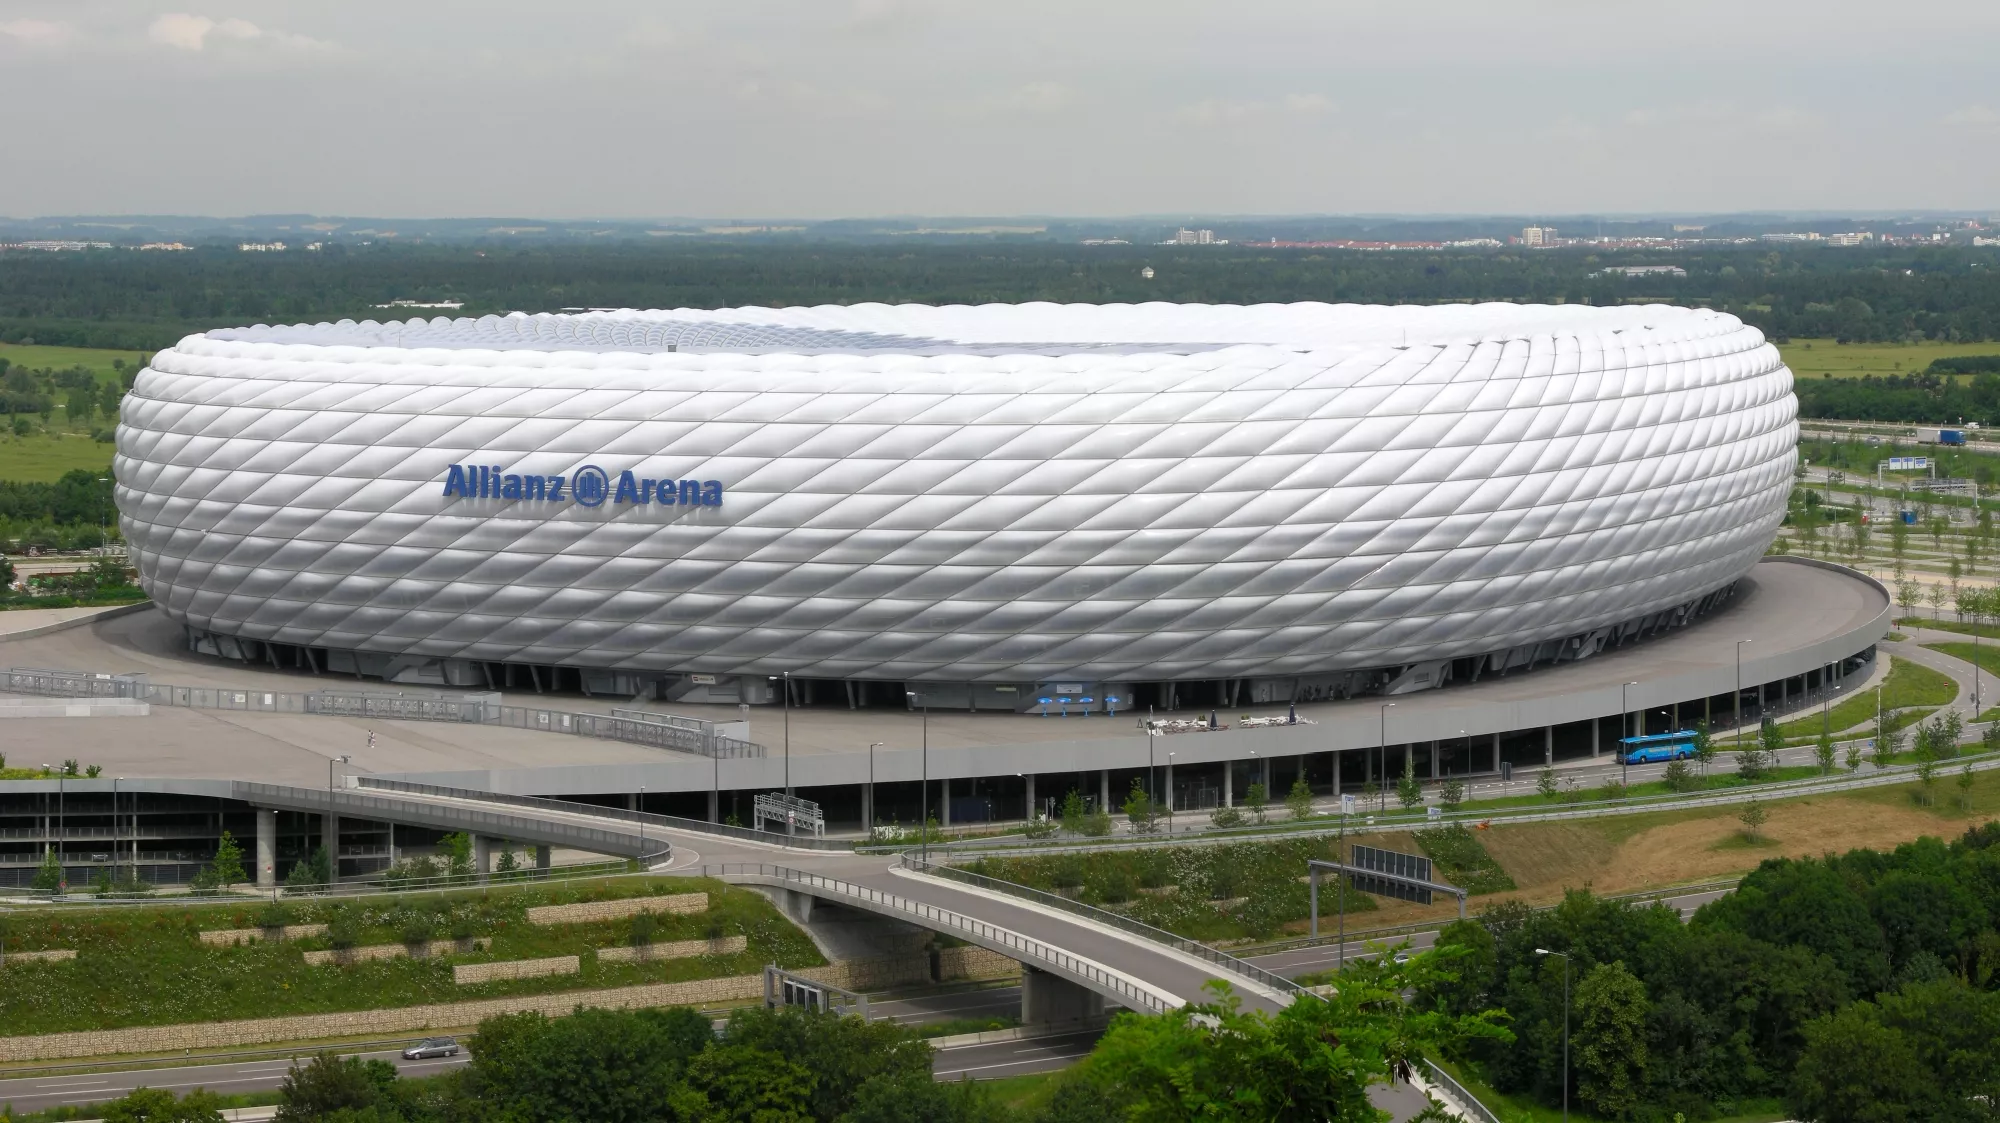 Allianz Arena in Germany, Europe | Football - Rated 6.1